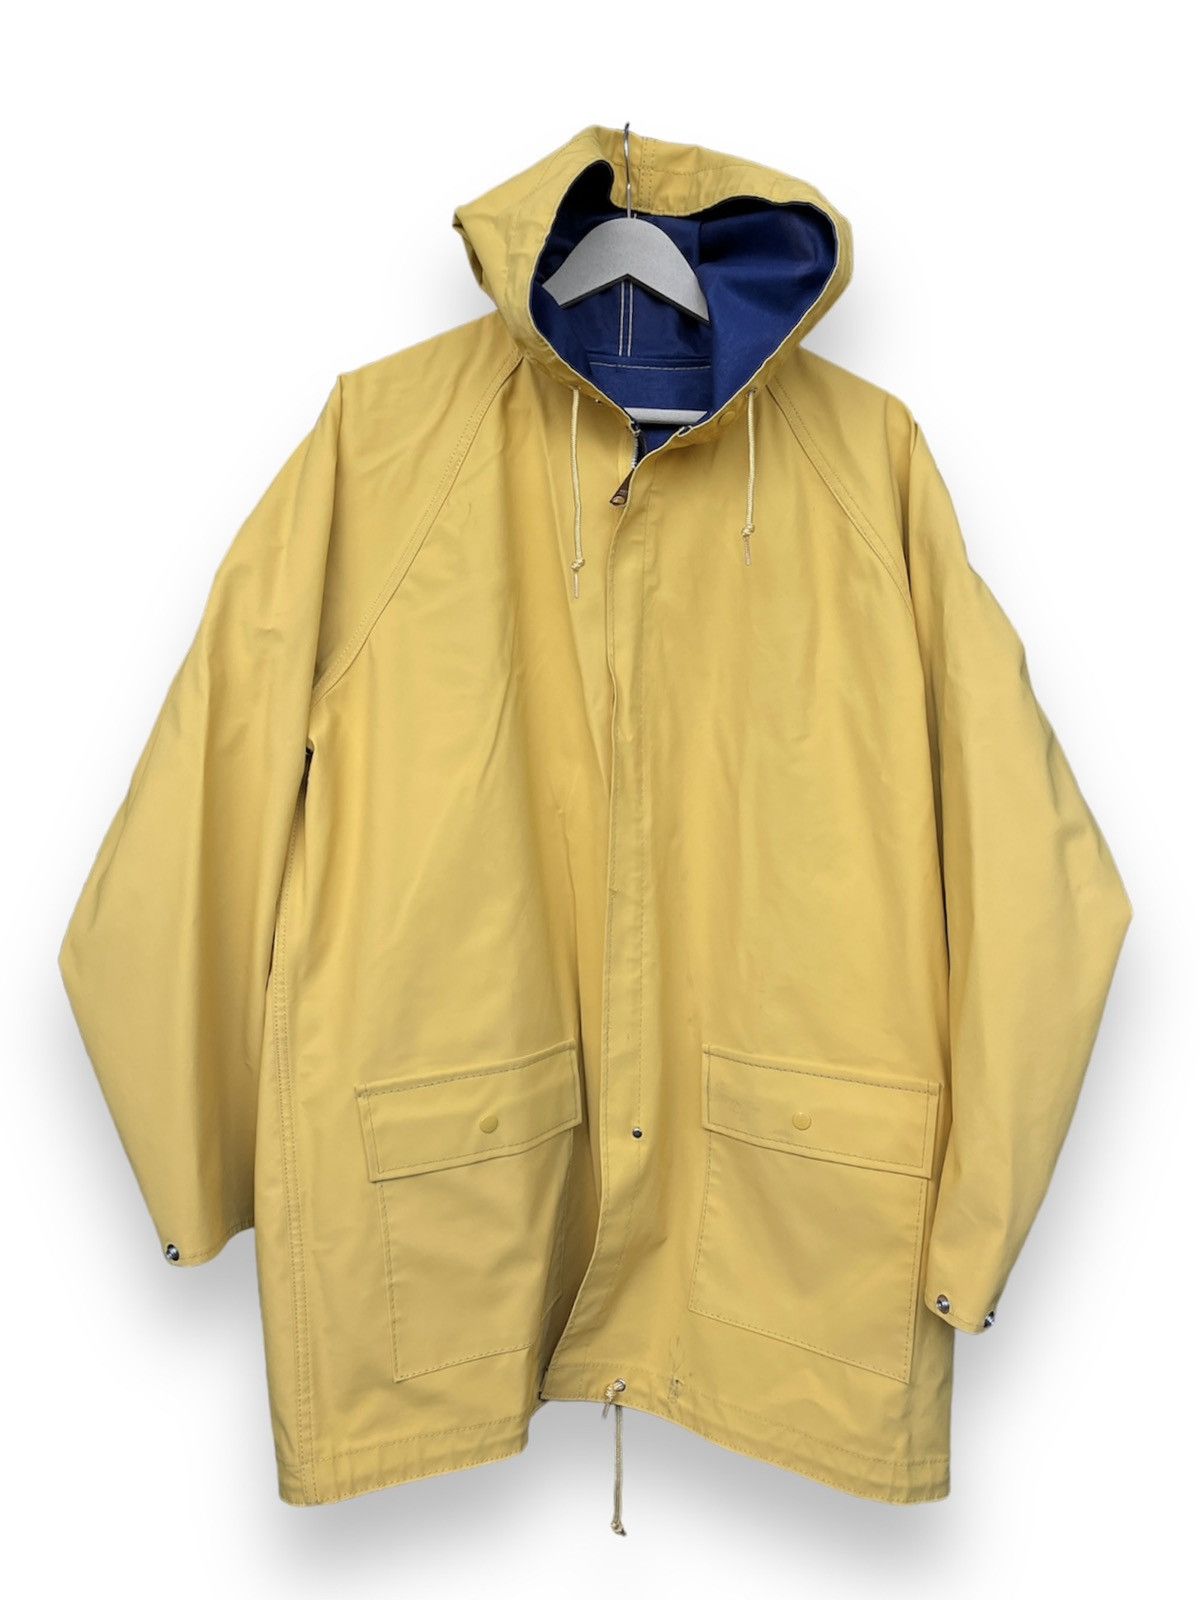 Outdoor Style Go Out! - Scene Reversible USA Parka Waterproof Jacket - 3